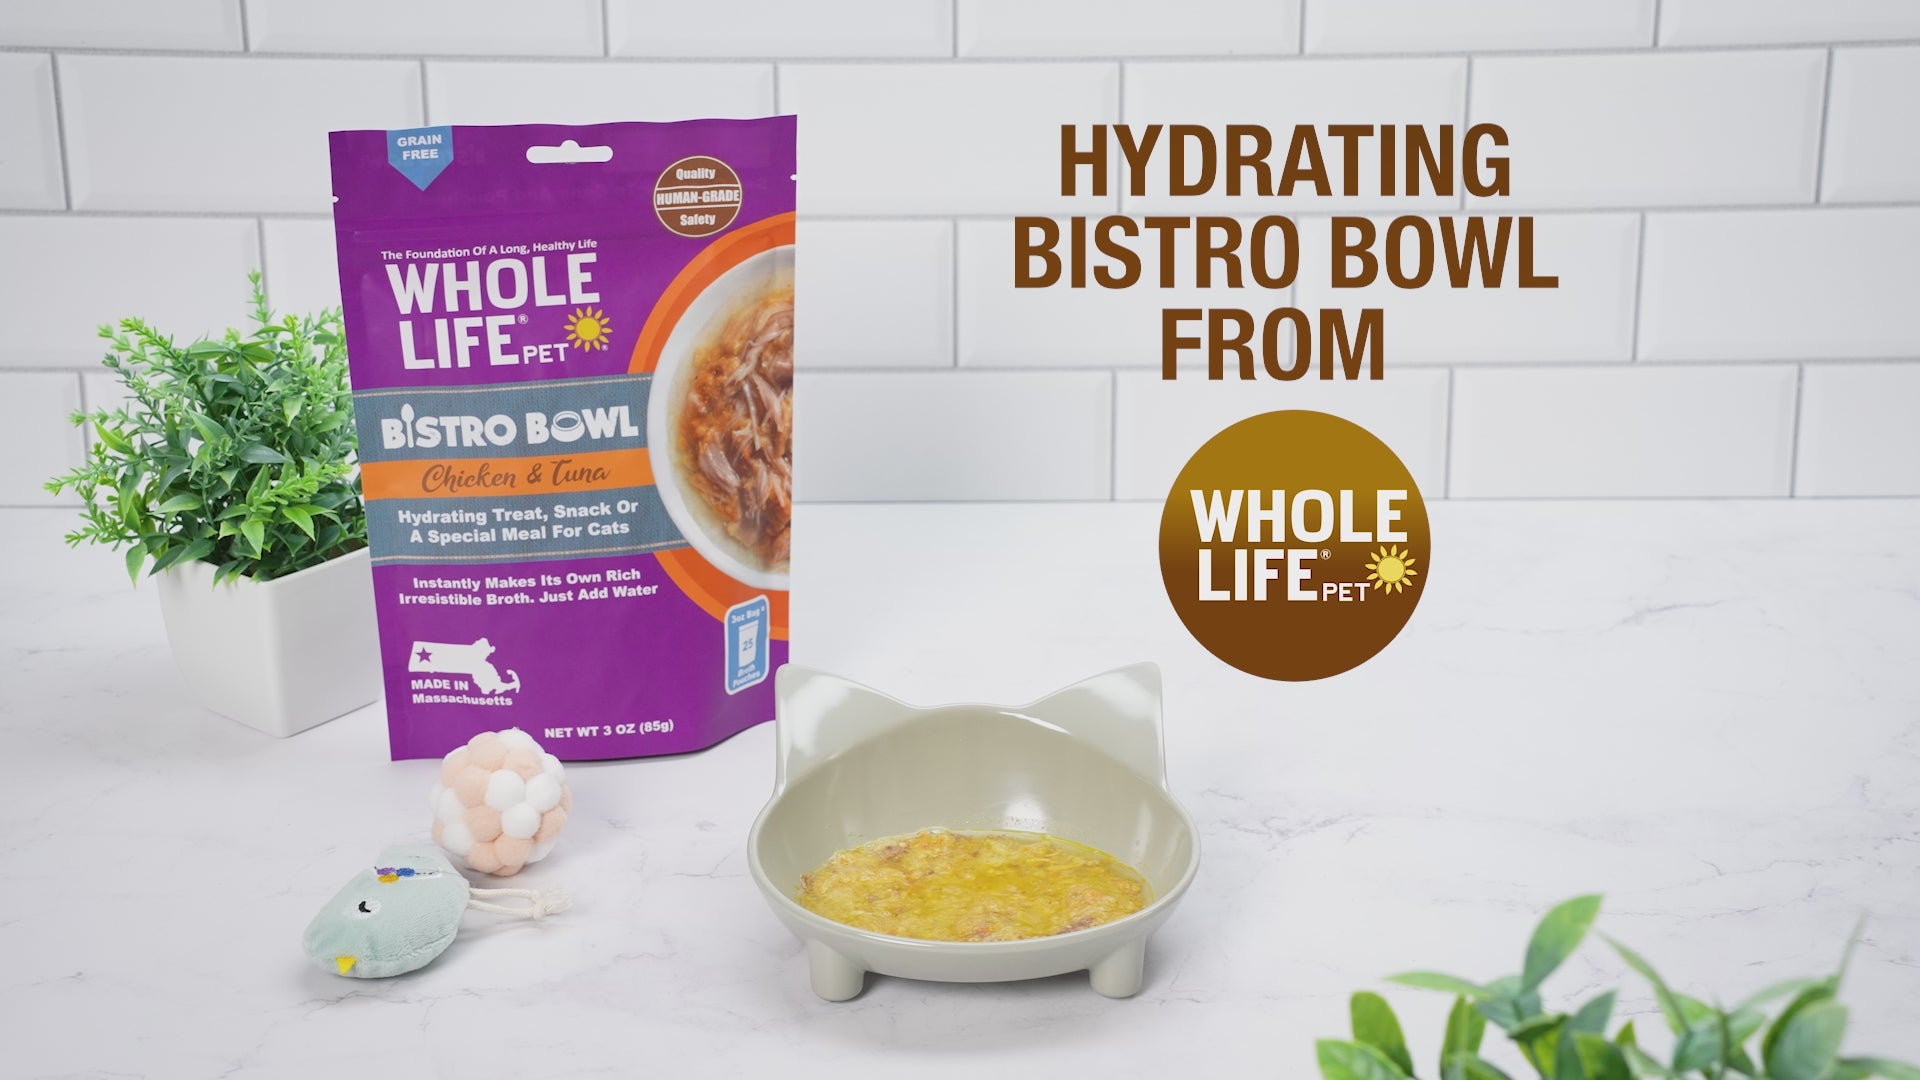 Bistro Bowls – Chicken & Tuna Hydrating Snack and Meal Compliment For Cats